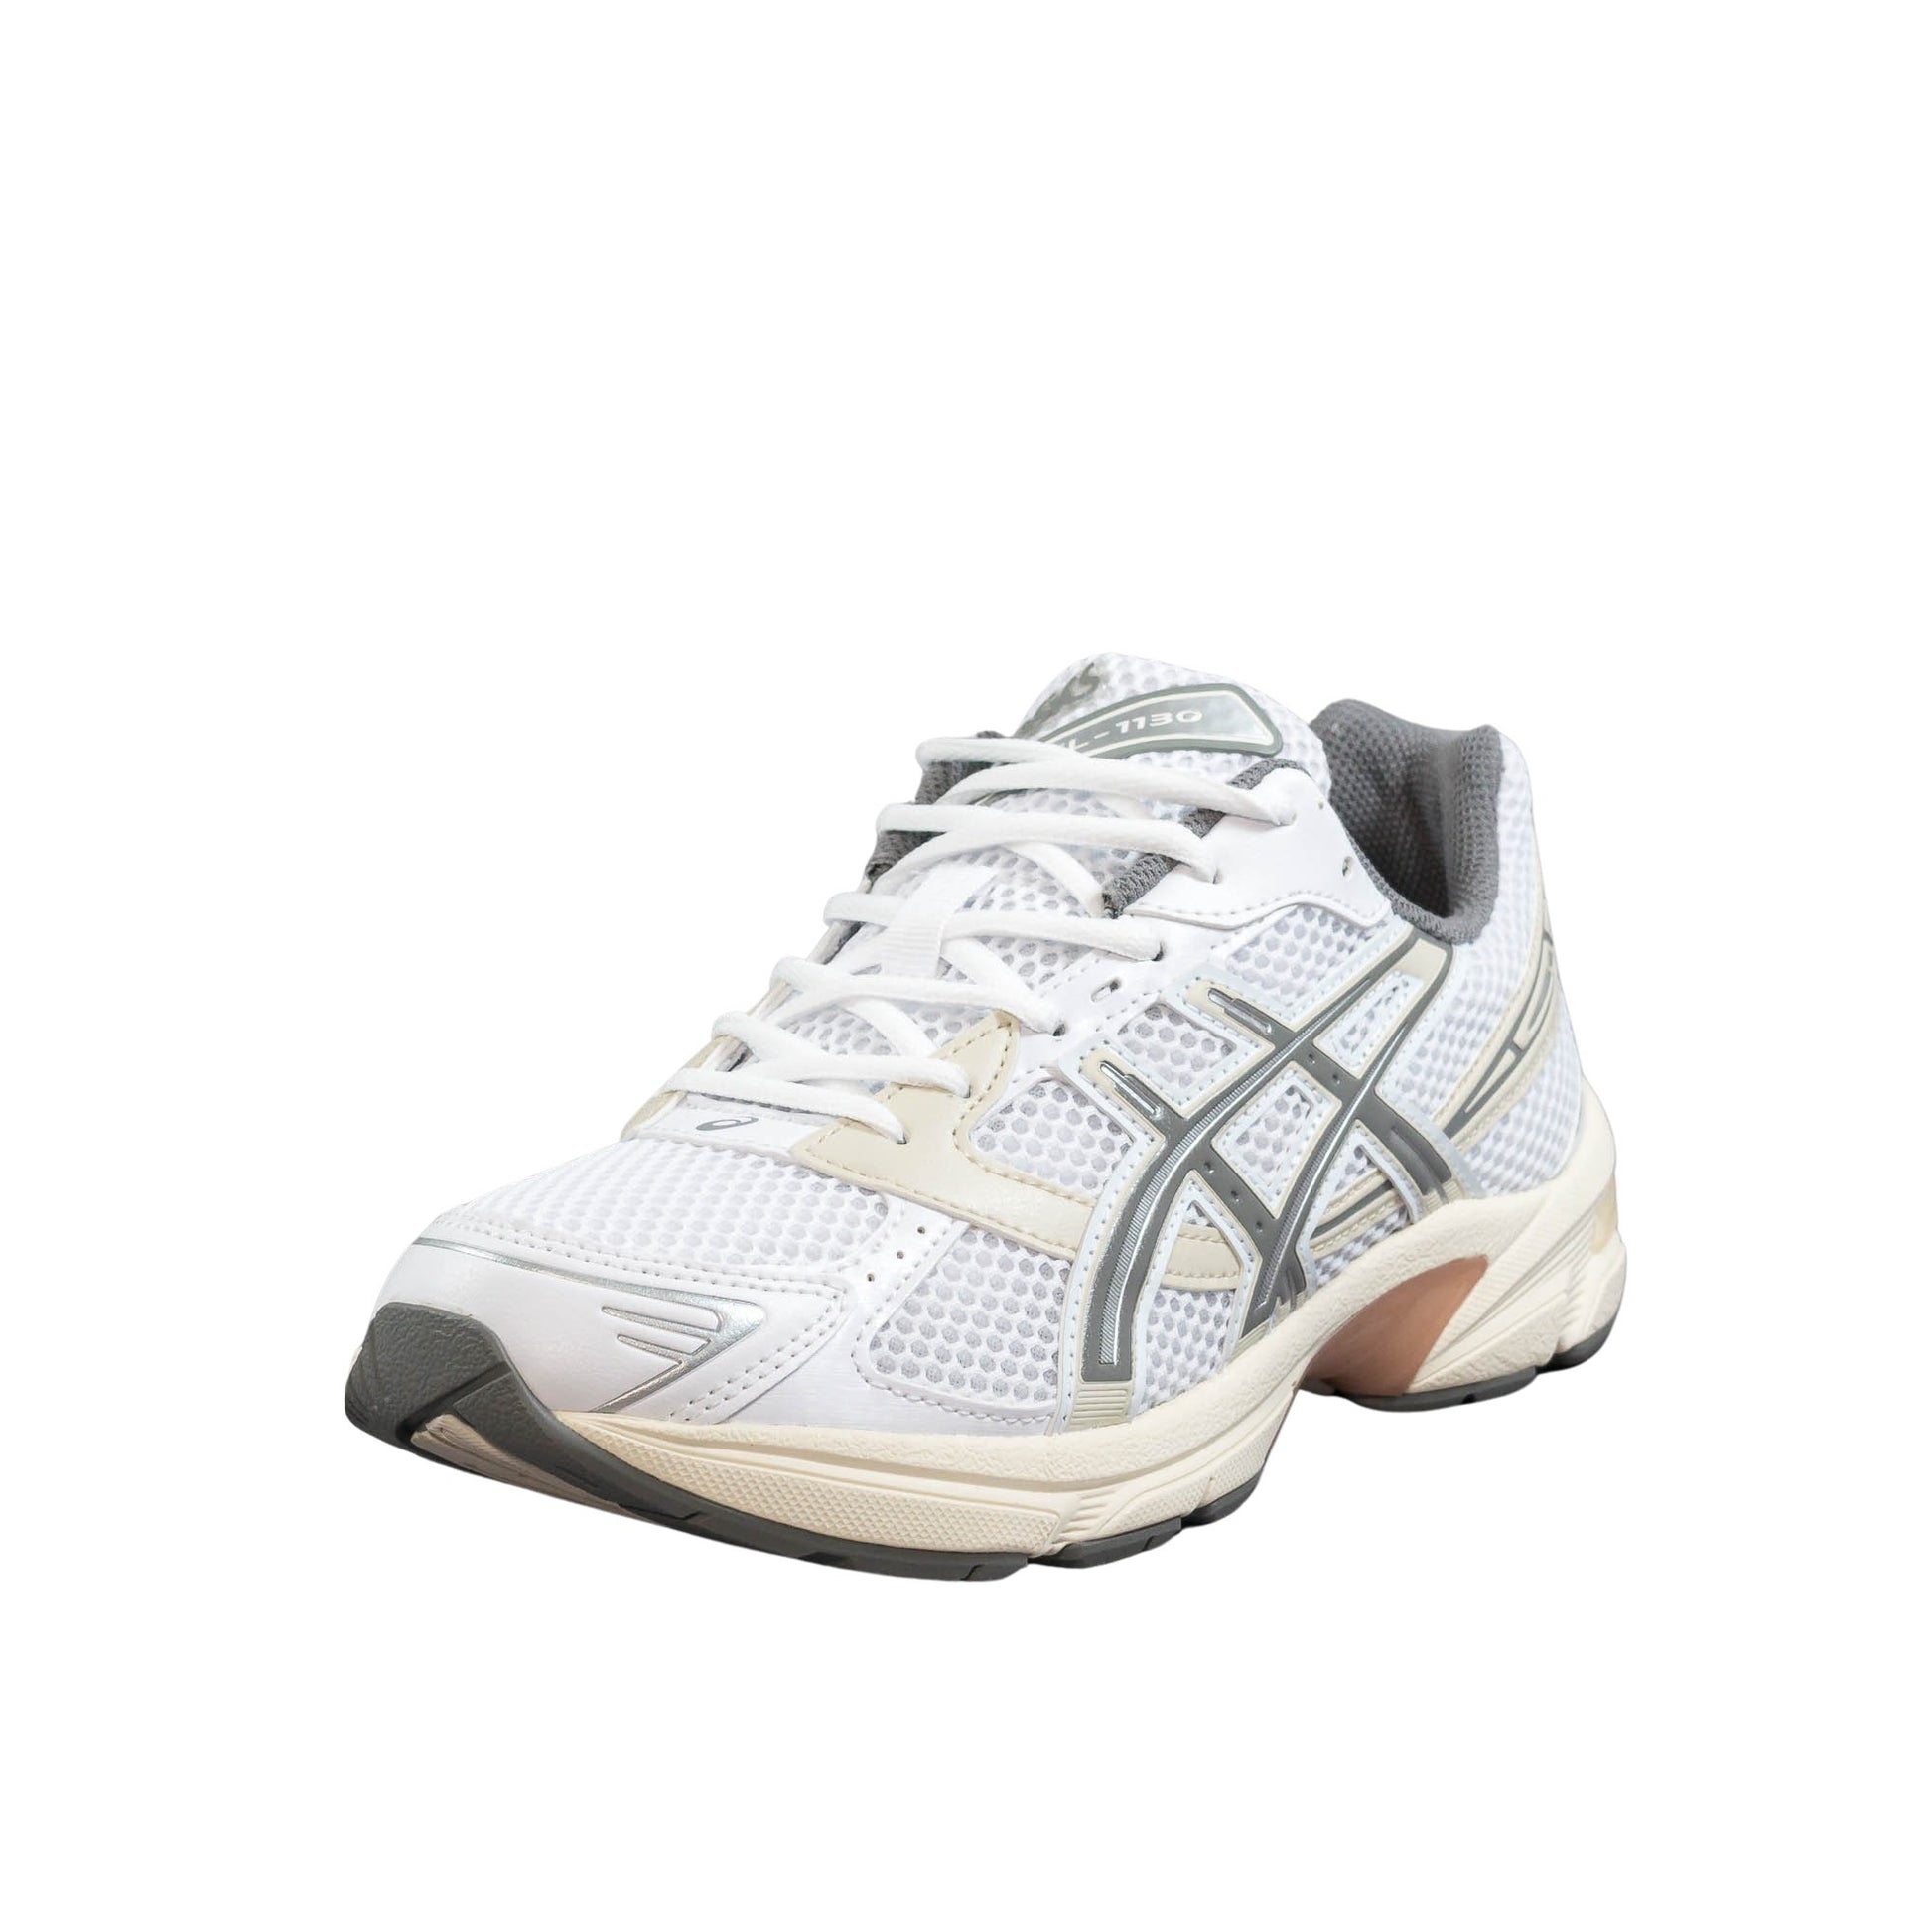 Gel-1130 Asics Goldjunge-Store Weiss – (1201A256-112) Sportstyle